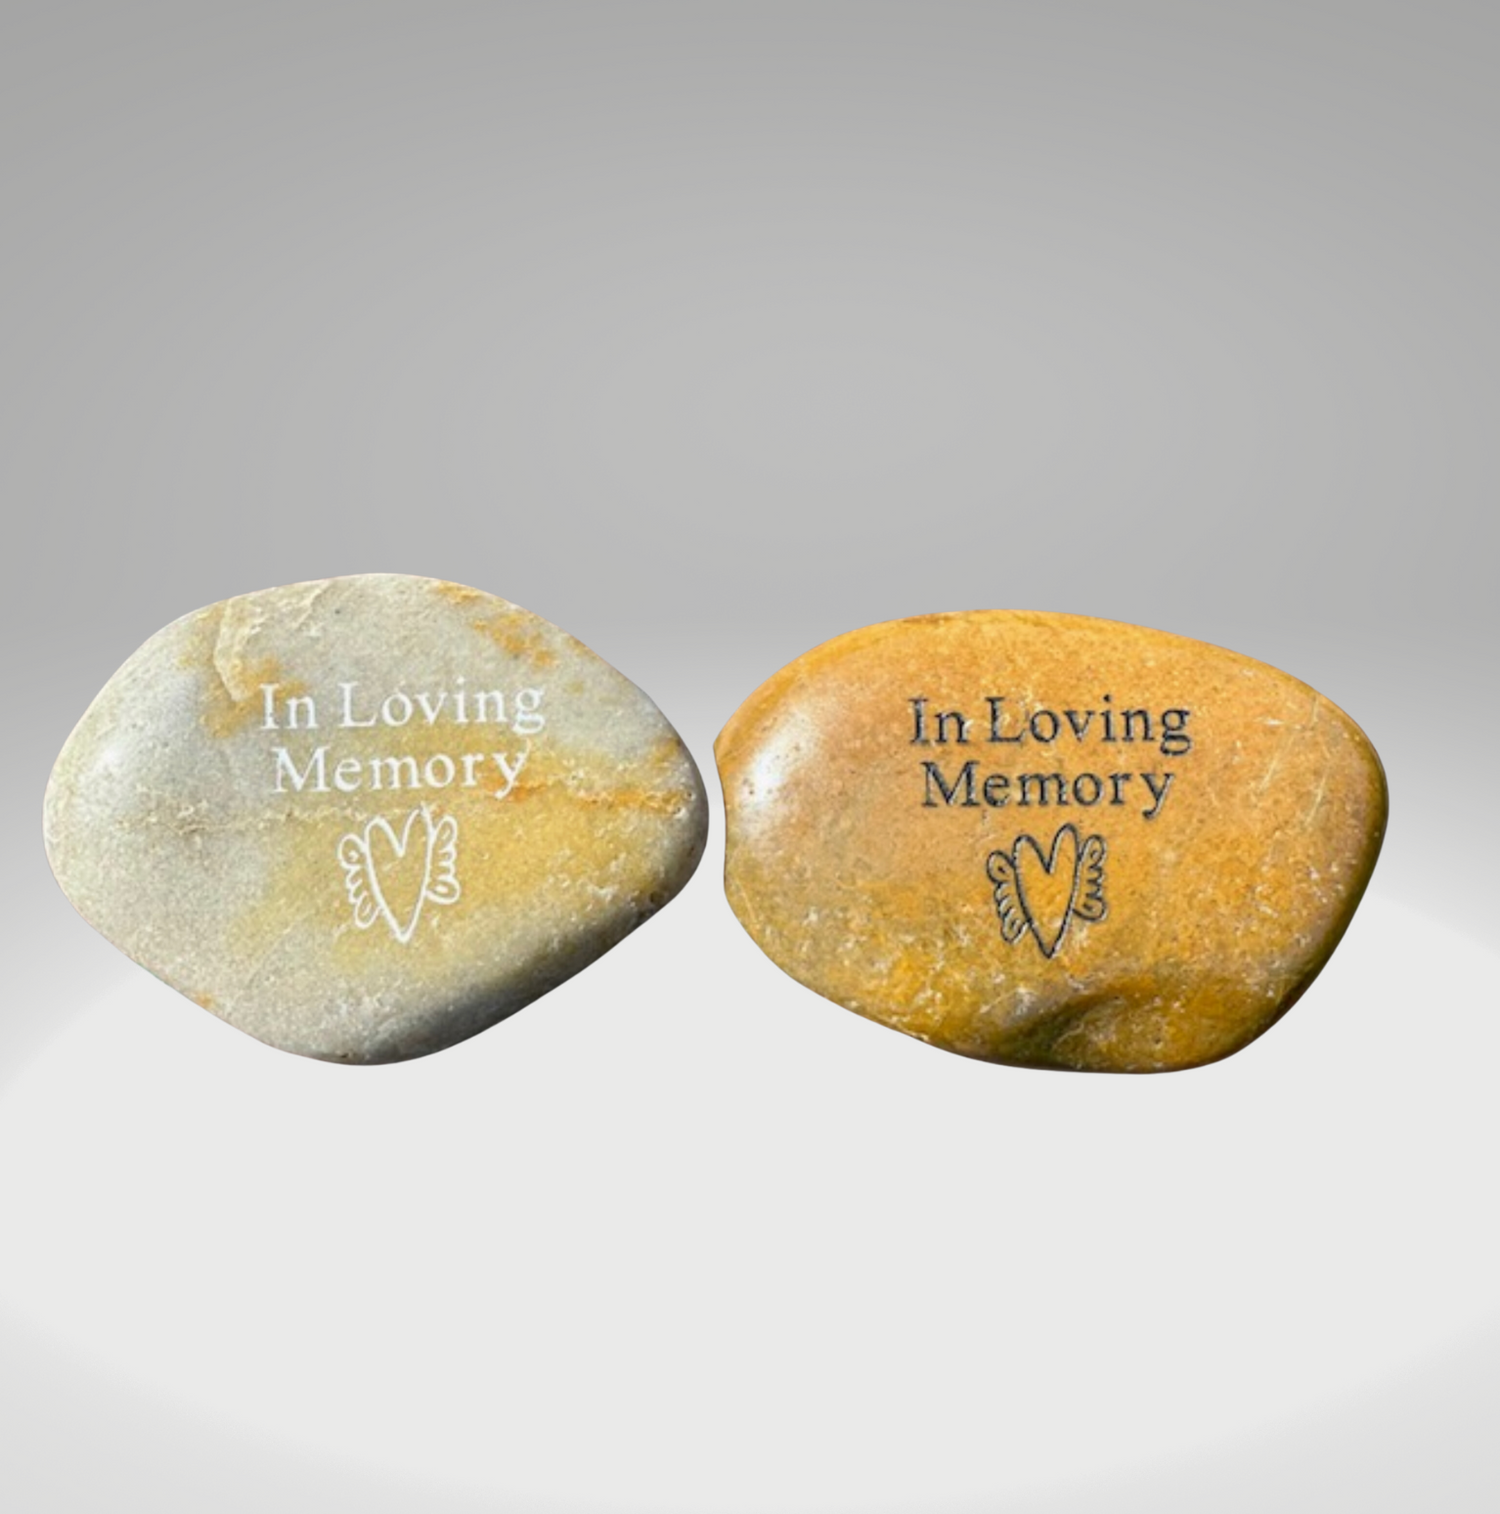 In Loving Memory Stone- Sympathy Gift- Sold Only In A Gift Box